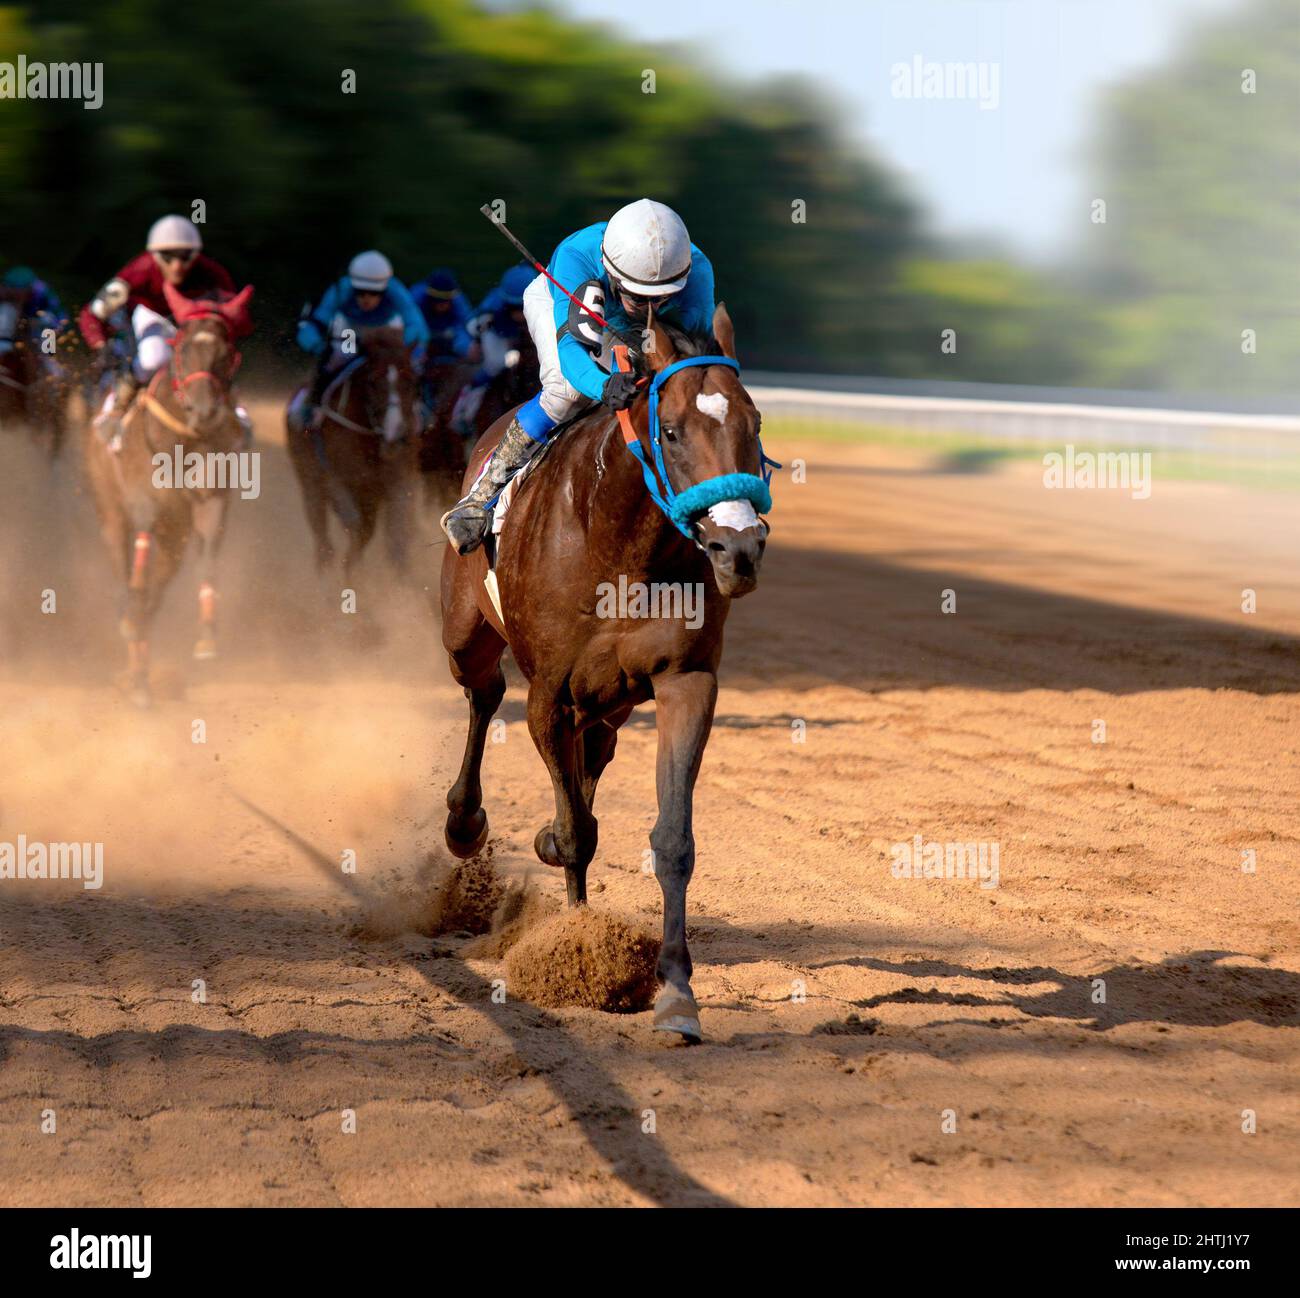 Galloping race horses in racing competition. Jockey on racing horse. Sport. Champion. Hippodrome. Equestrian. Derby. Speed Stock Photo